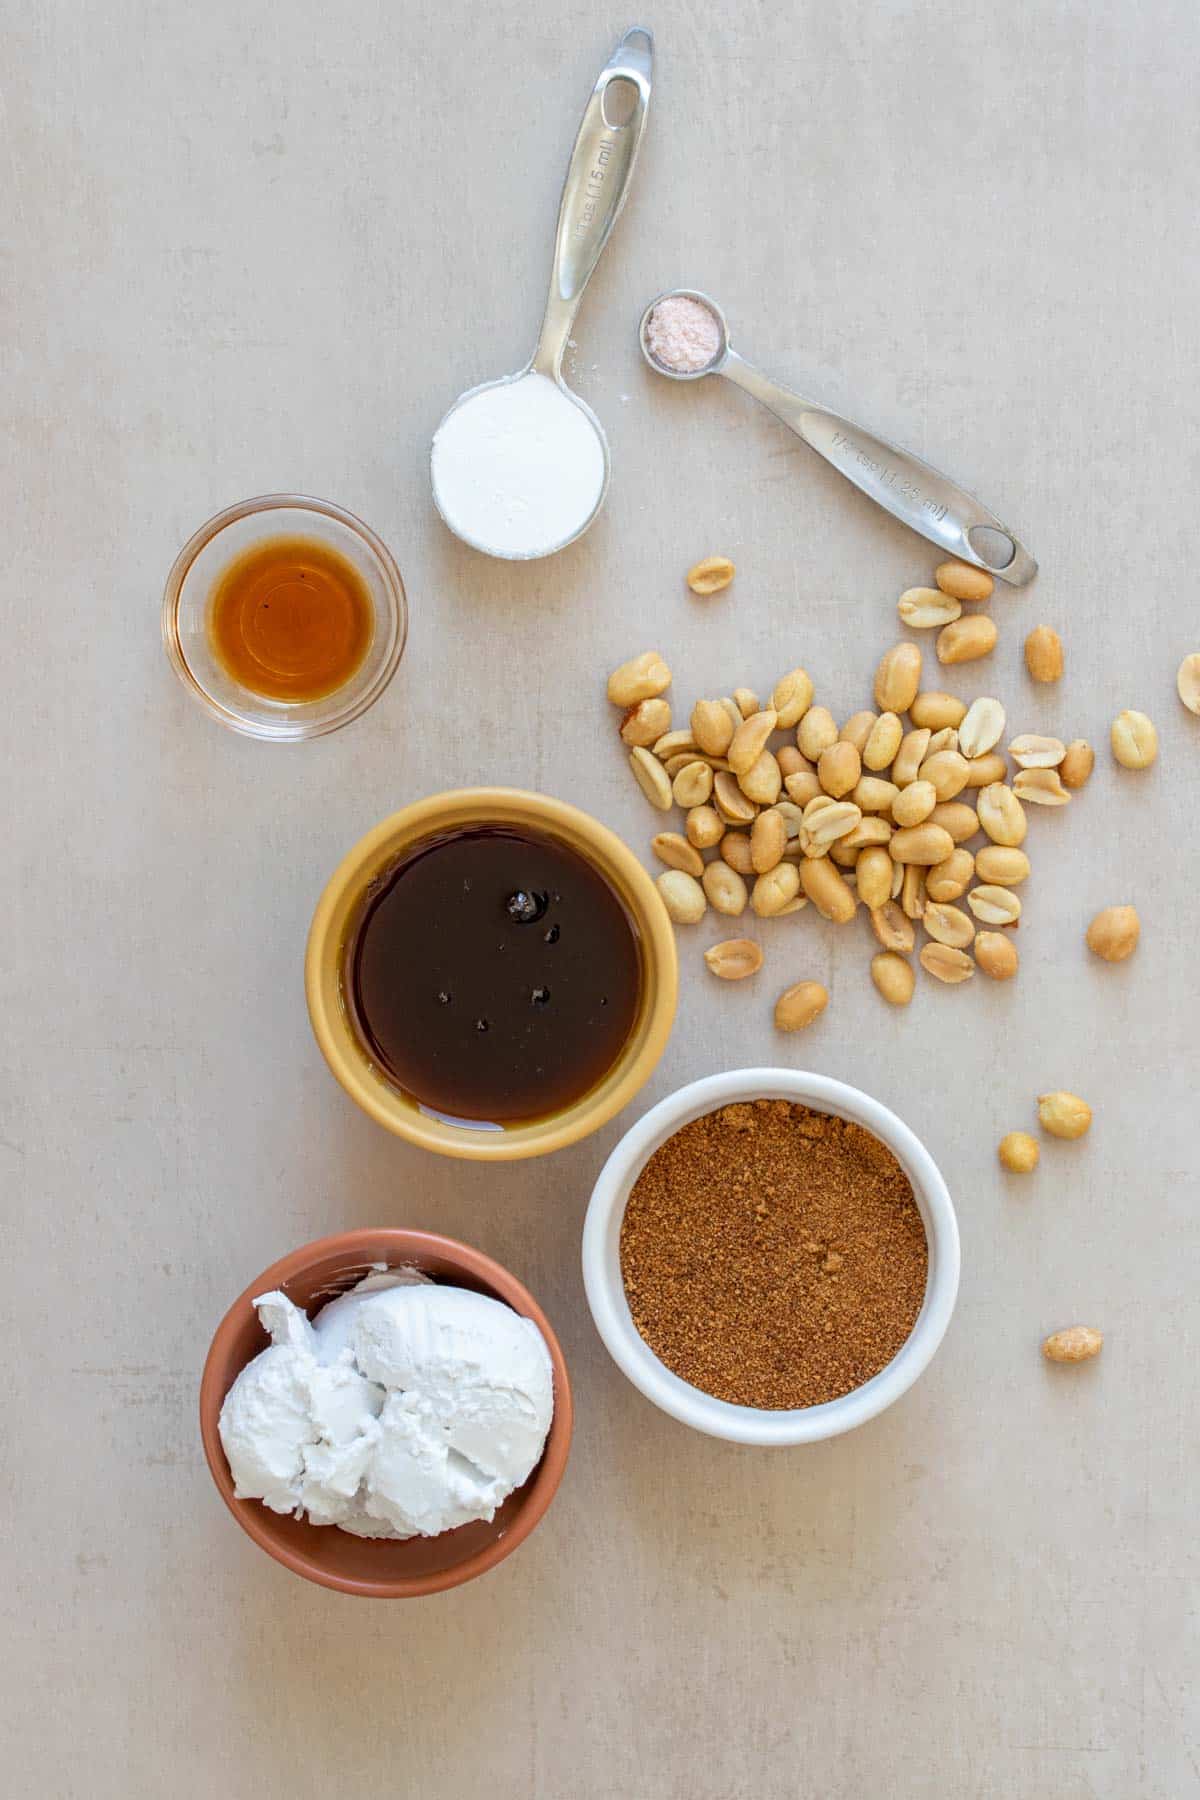 Ingredients needed to make a peanut brittle sitting on a tan surface